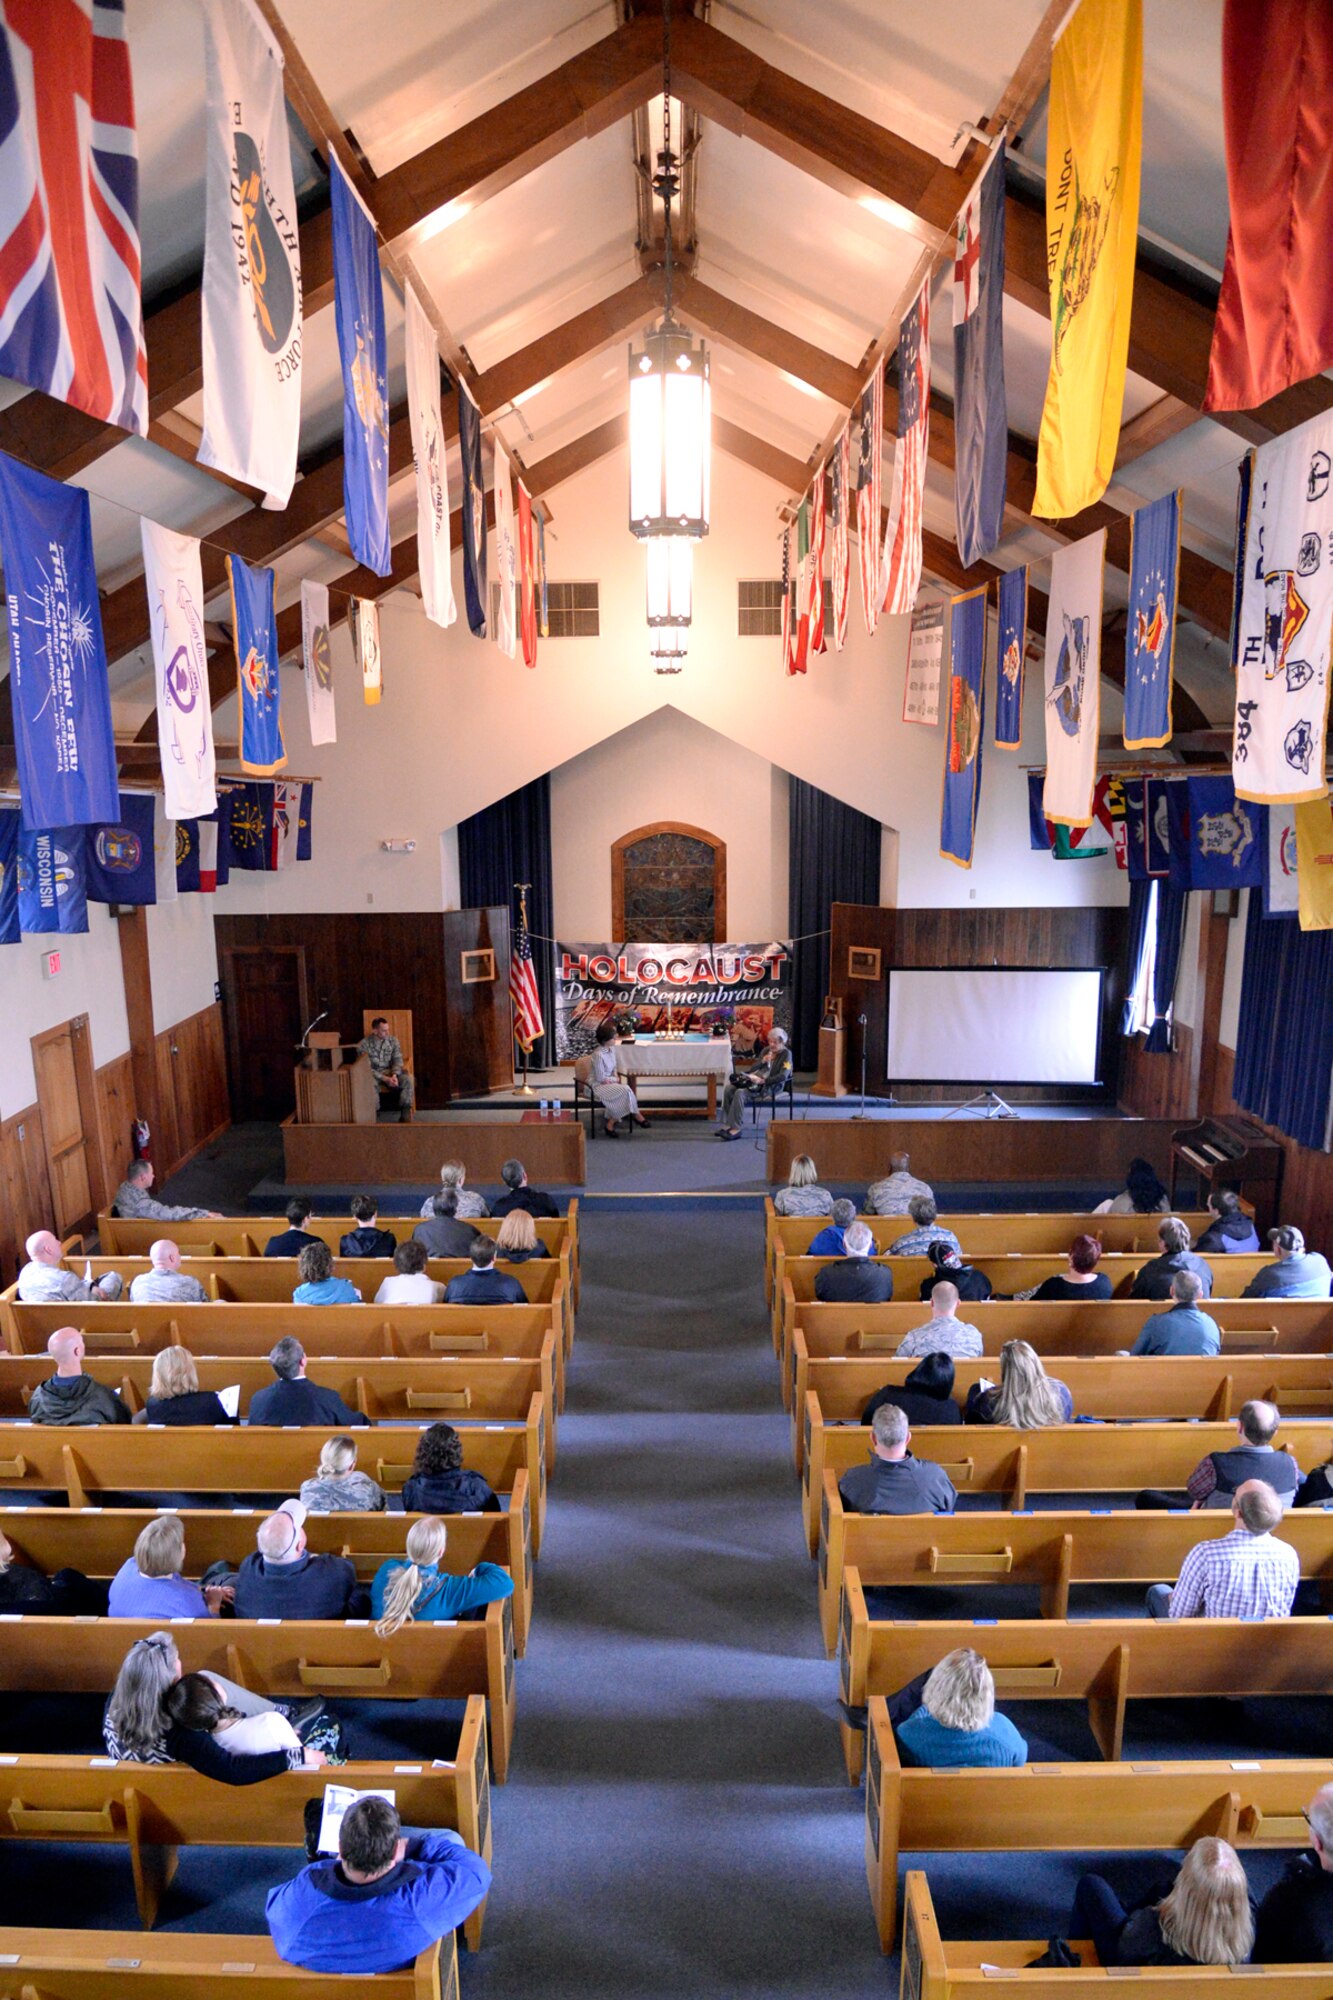 Attendees listen to guest speakers during the Holocaust Remembrance Day service at the Nate Mazar Chapel, April 25, 2017. Holocaust survivor Liesel Shineberg and Dr. Karen Hirsch were the event’s guest speakers. The service was organized by the Team Hill Special Observance Council, Holocaust Remembrance Committee. (Todd Cromar/U.S. Air Force) 